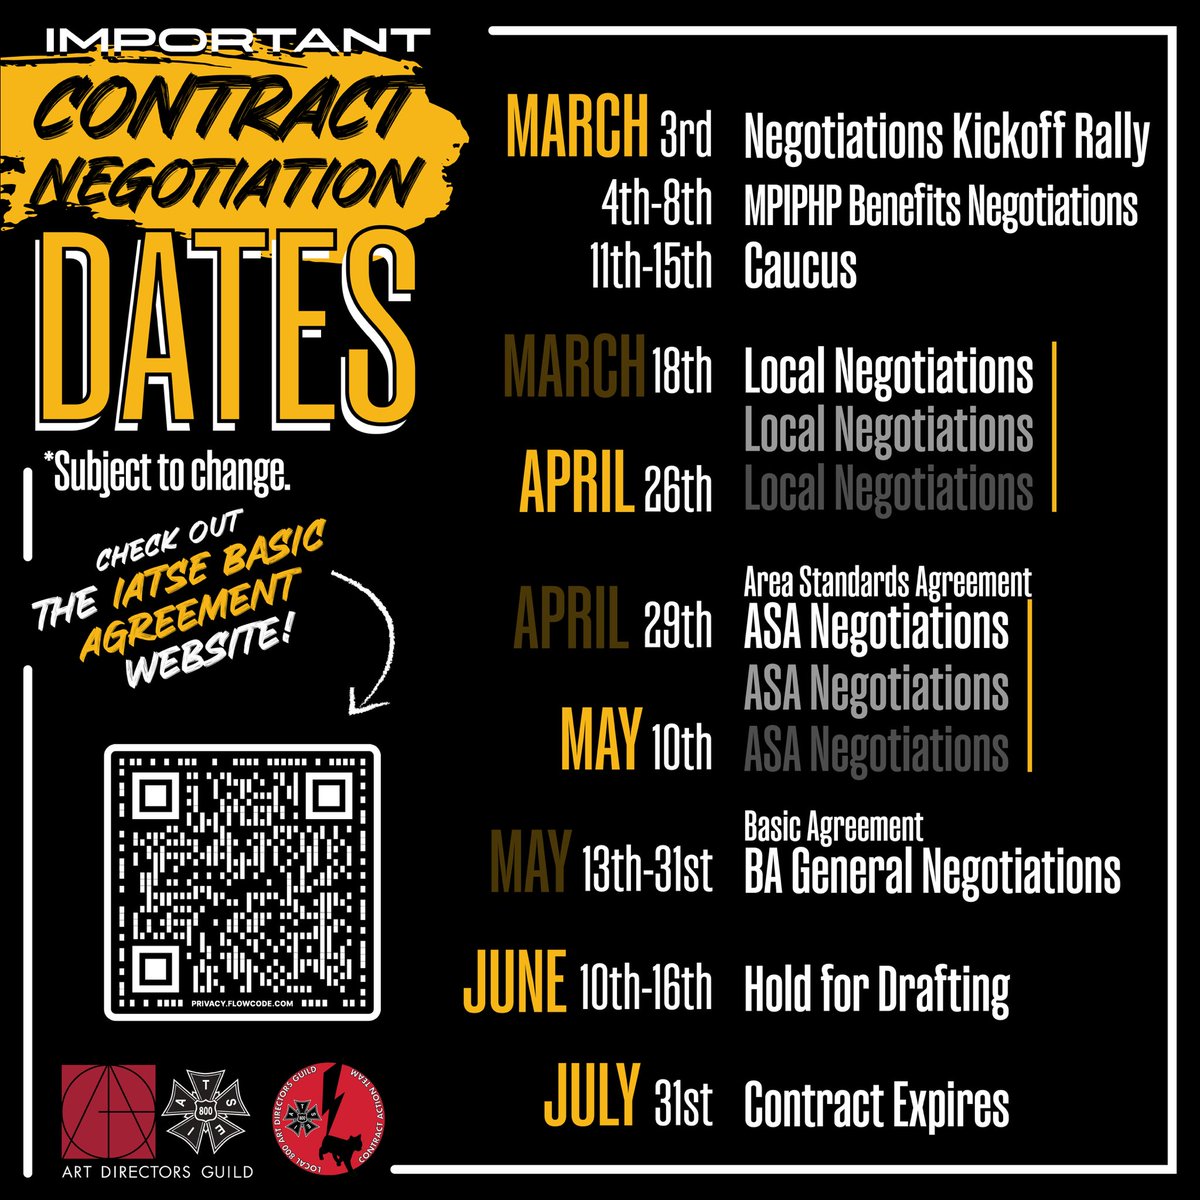 Here’s the IATSE contract negotiation schedule. Let’s fight for a good deal! #istse #hollywood